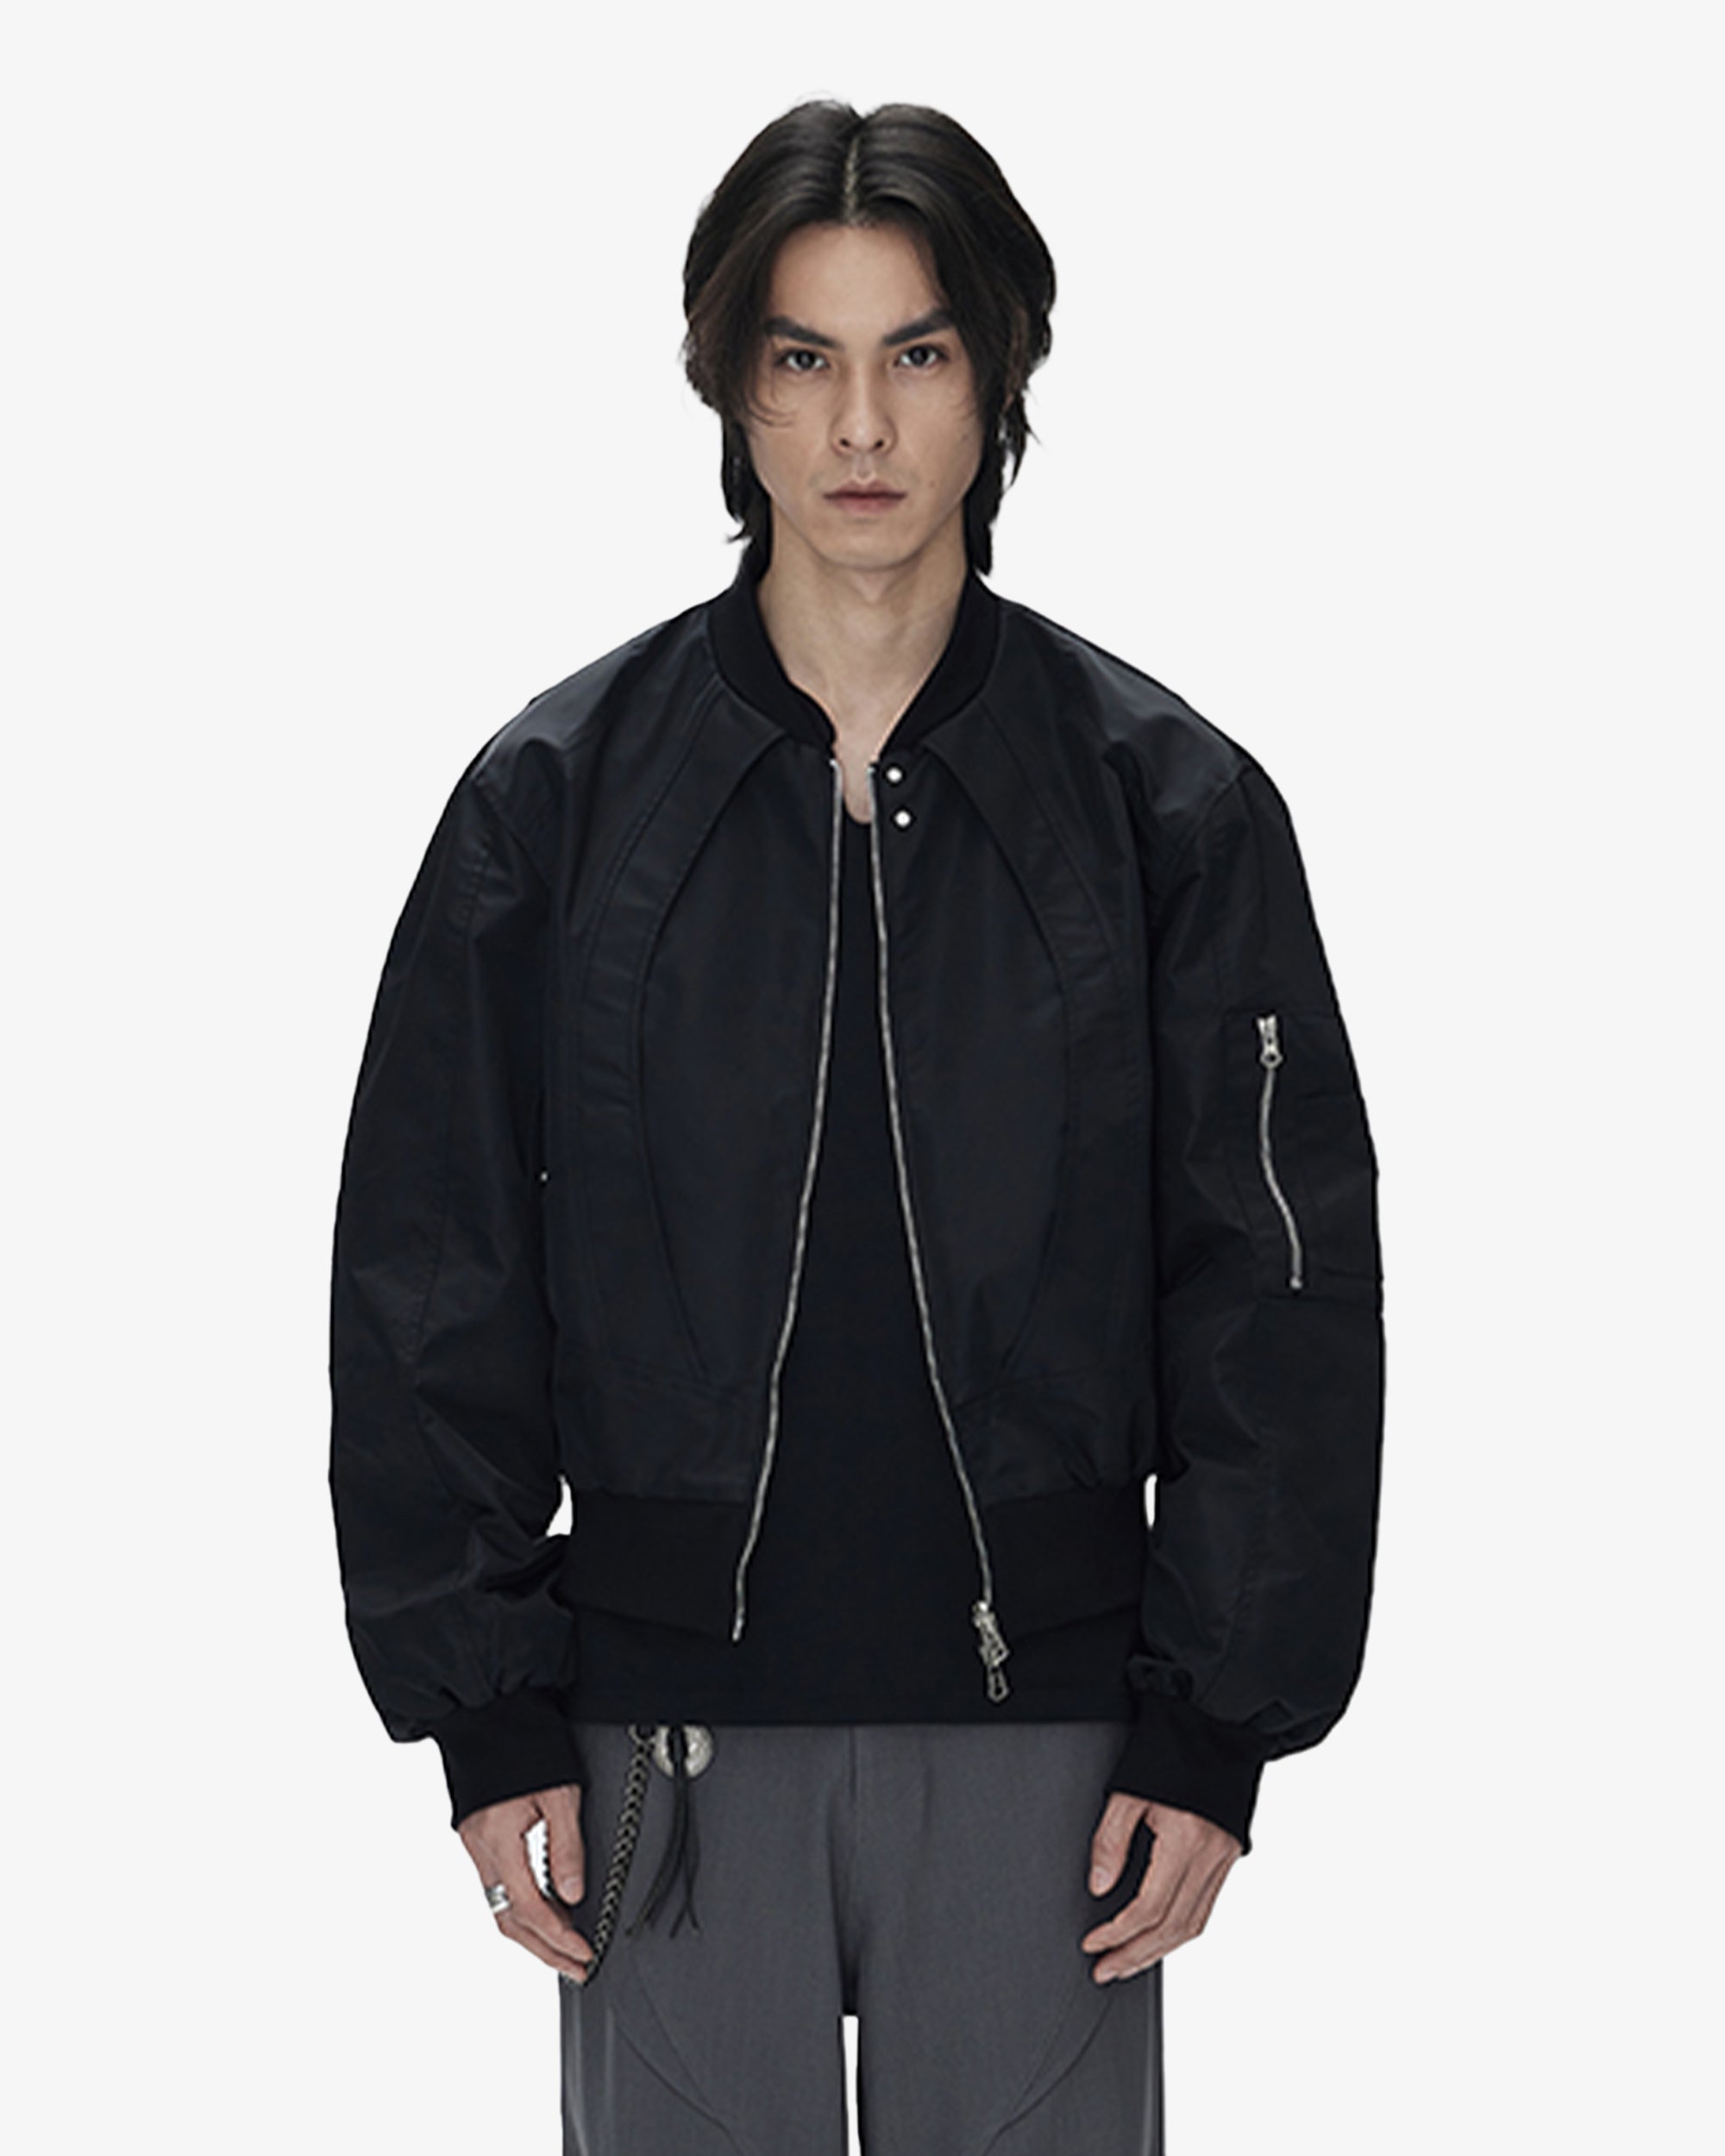 Reversible MA-1 bomber jacket with two way zipper